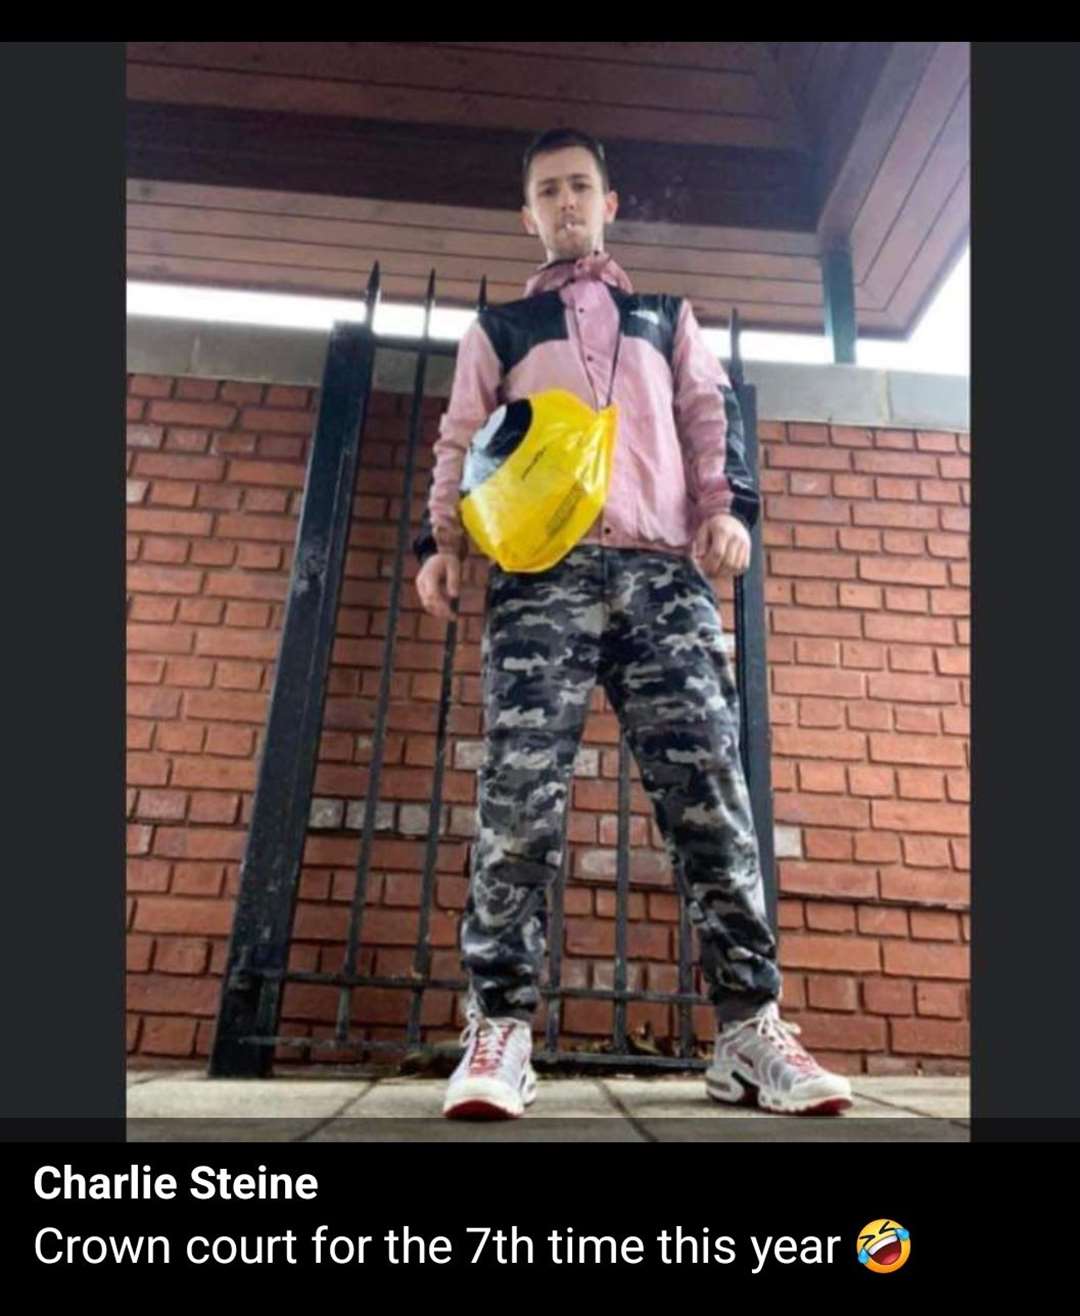 Charlie Steine laughed on Facebook about his seventh appearance at Canterbury Crown Court in a year. Pic: Facebook